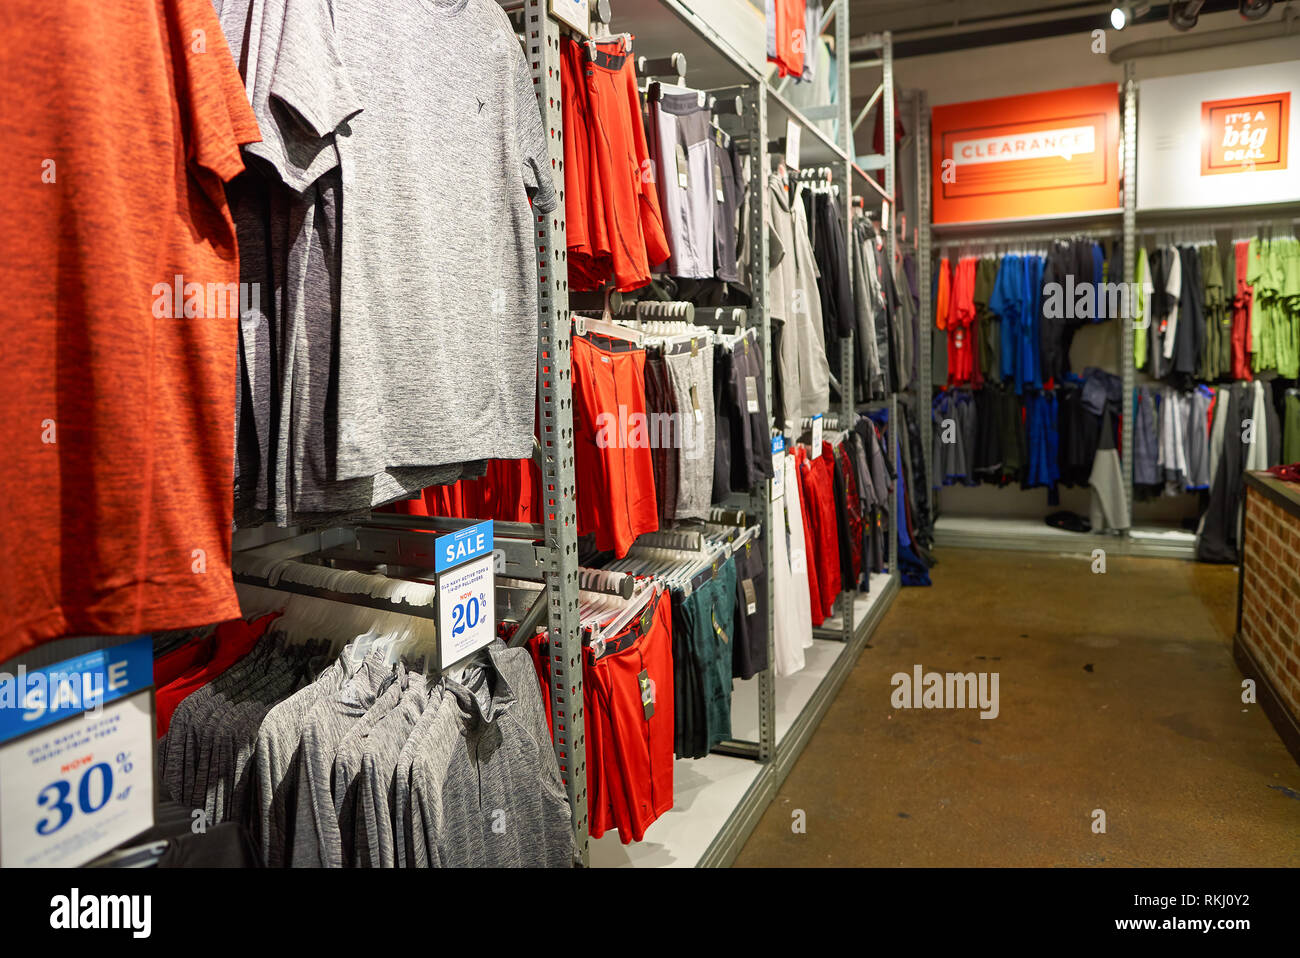 NEW YORK - MARCH 18, 2016: inside of Old Navy store in New York. Old Navy is an American clothing and accessories retailer owned by American multinati Stock Photo